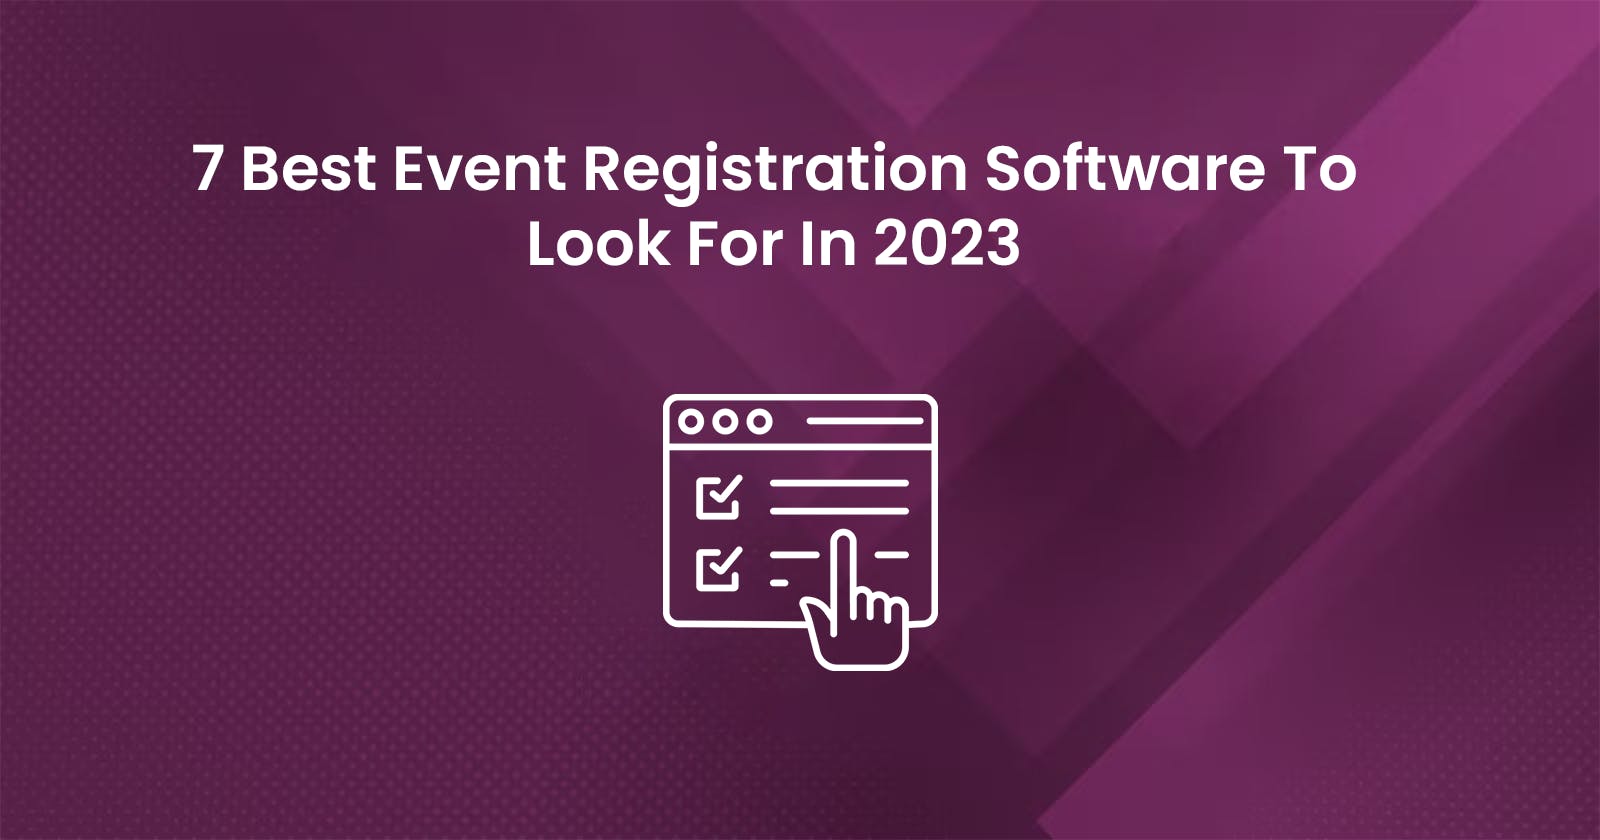 7 Best Event Registration Software To Look For In 2023